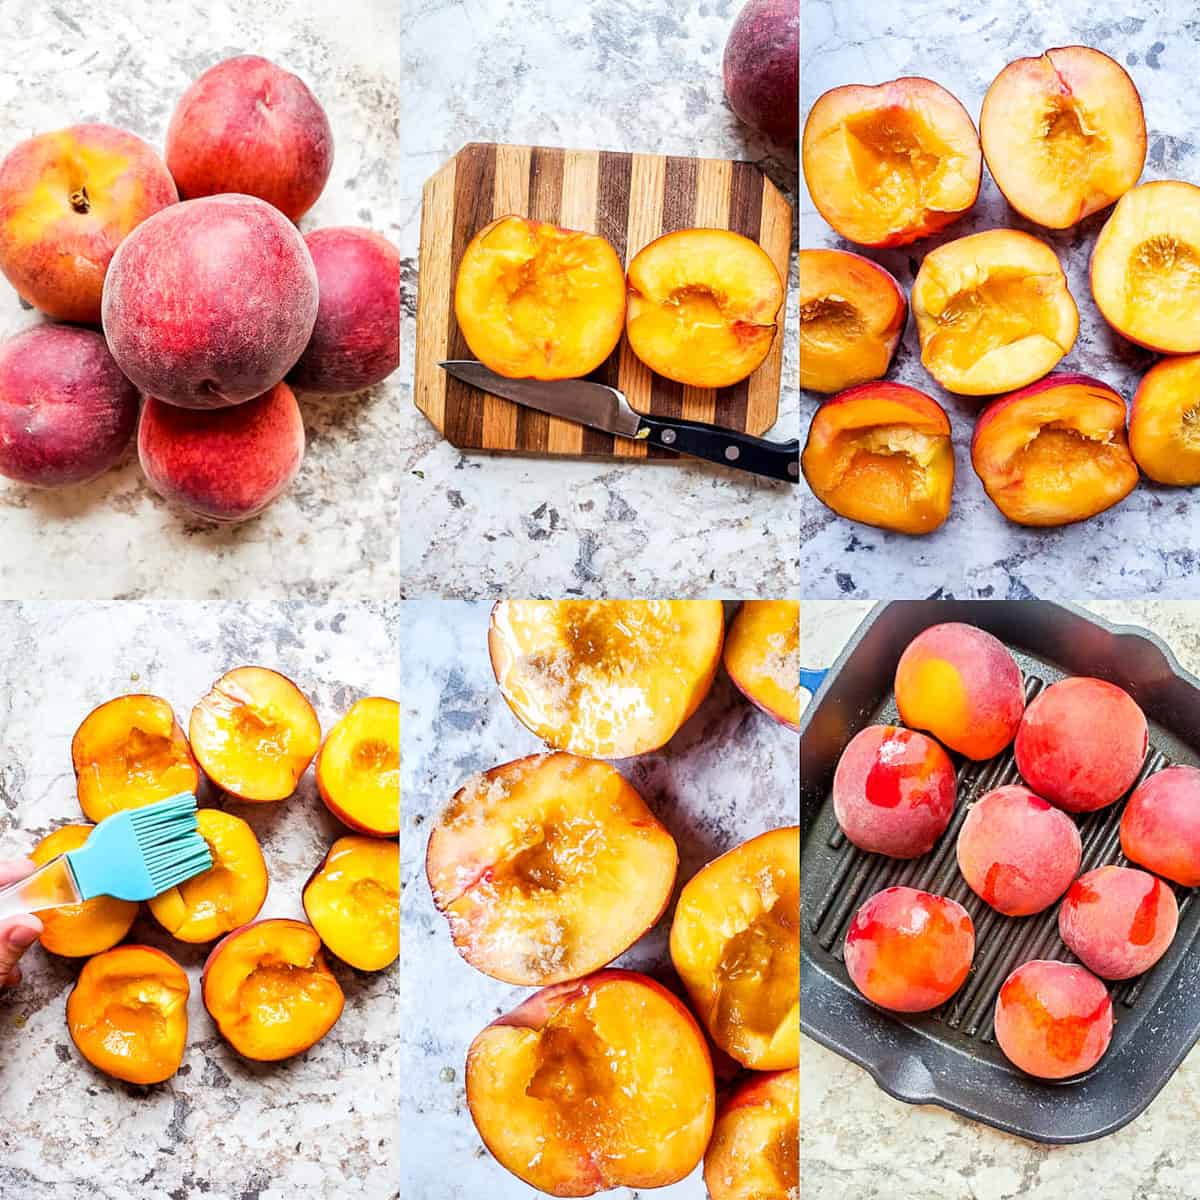 Prep image for grilled peach recipe. The image is a collage on 6 image showing step by step preparation and cooking. 